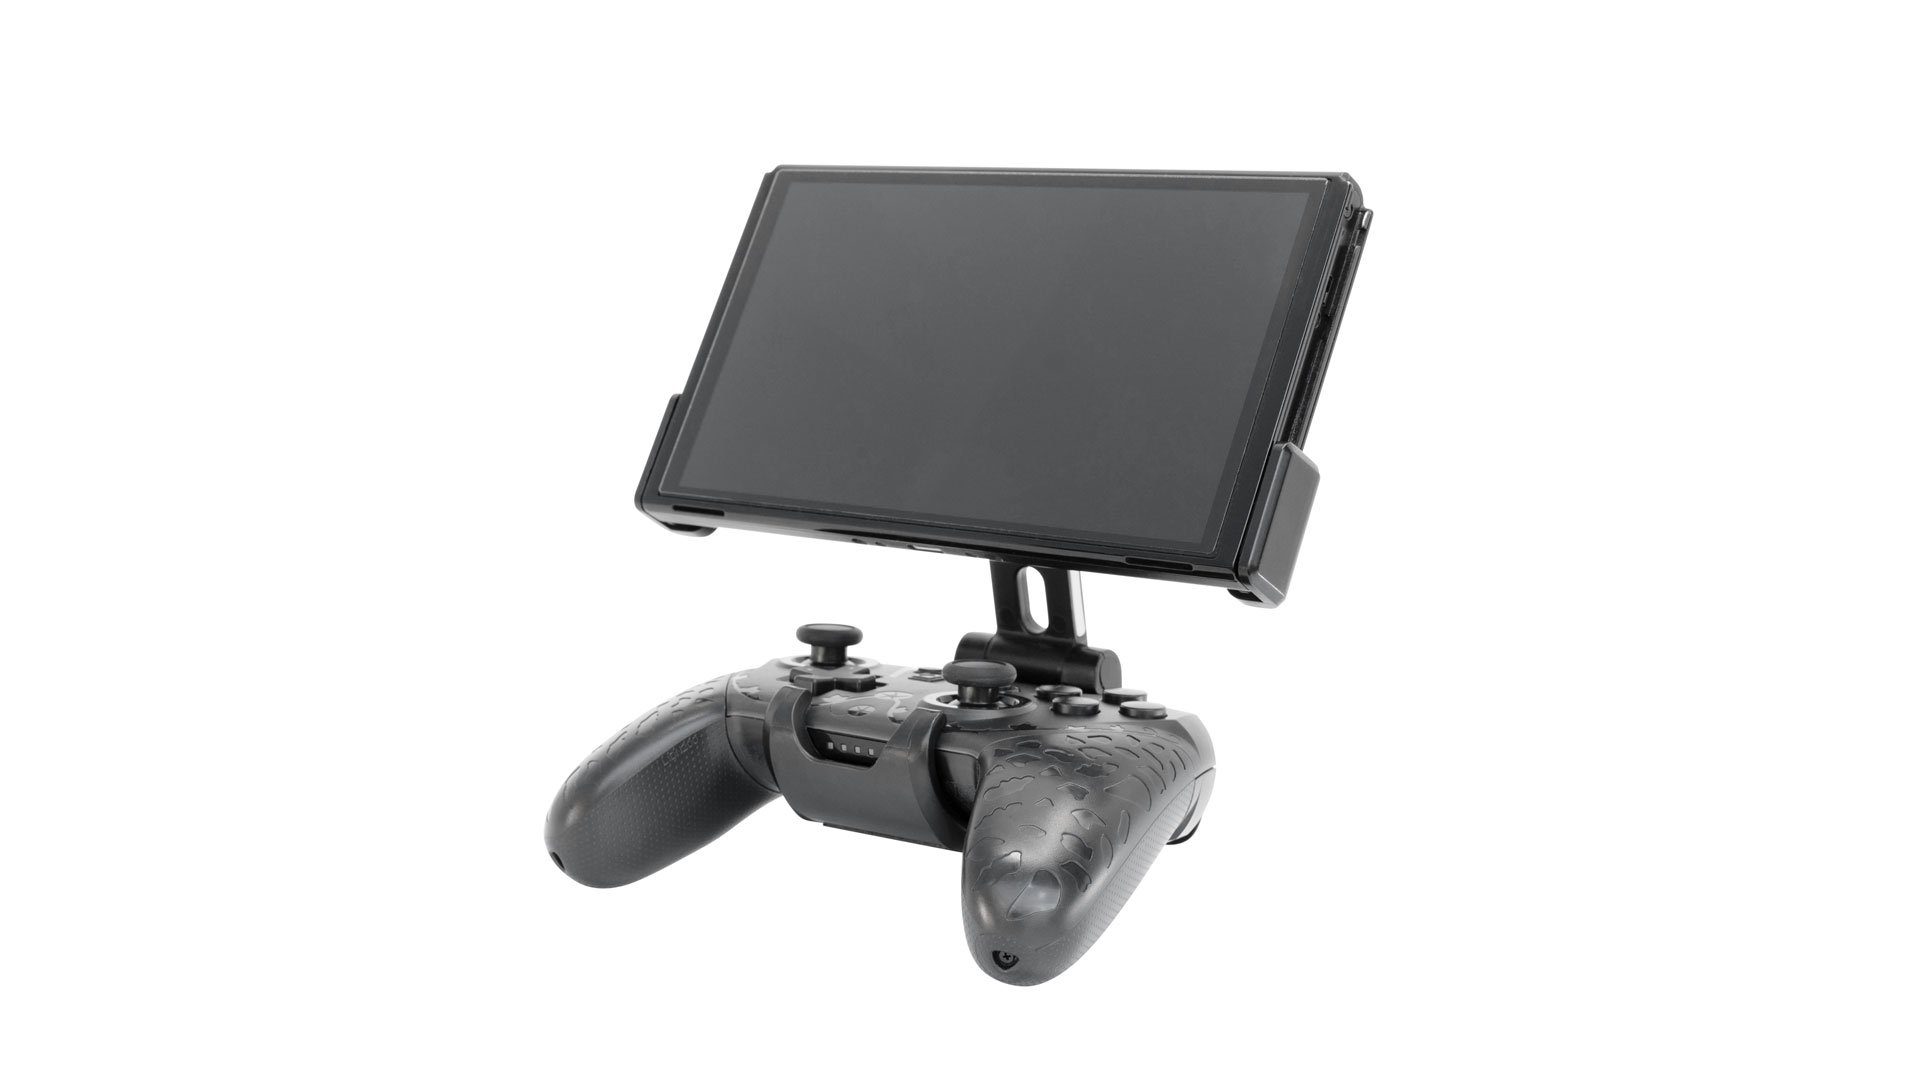 Fixture S2 launches soon, compatible with Nintendo Switch OLED Model 